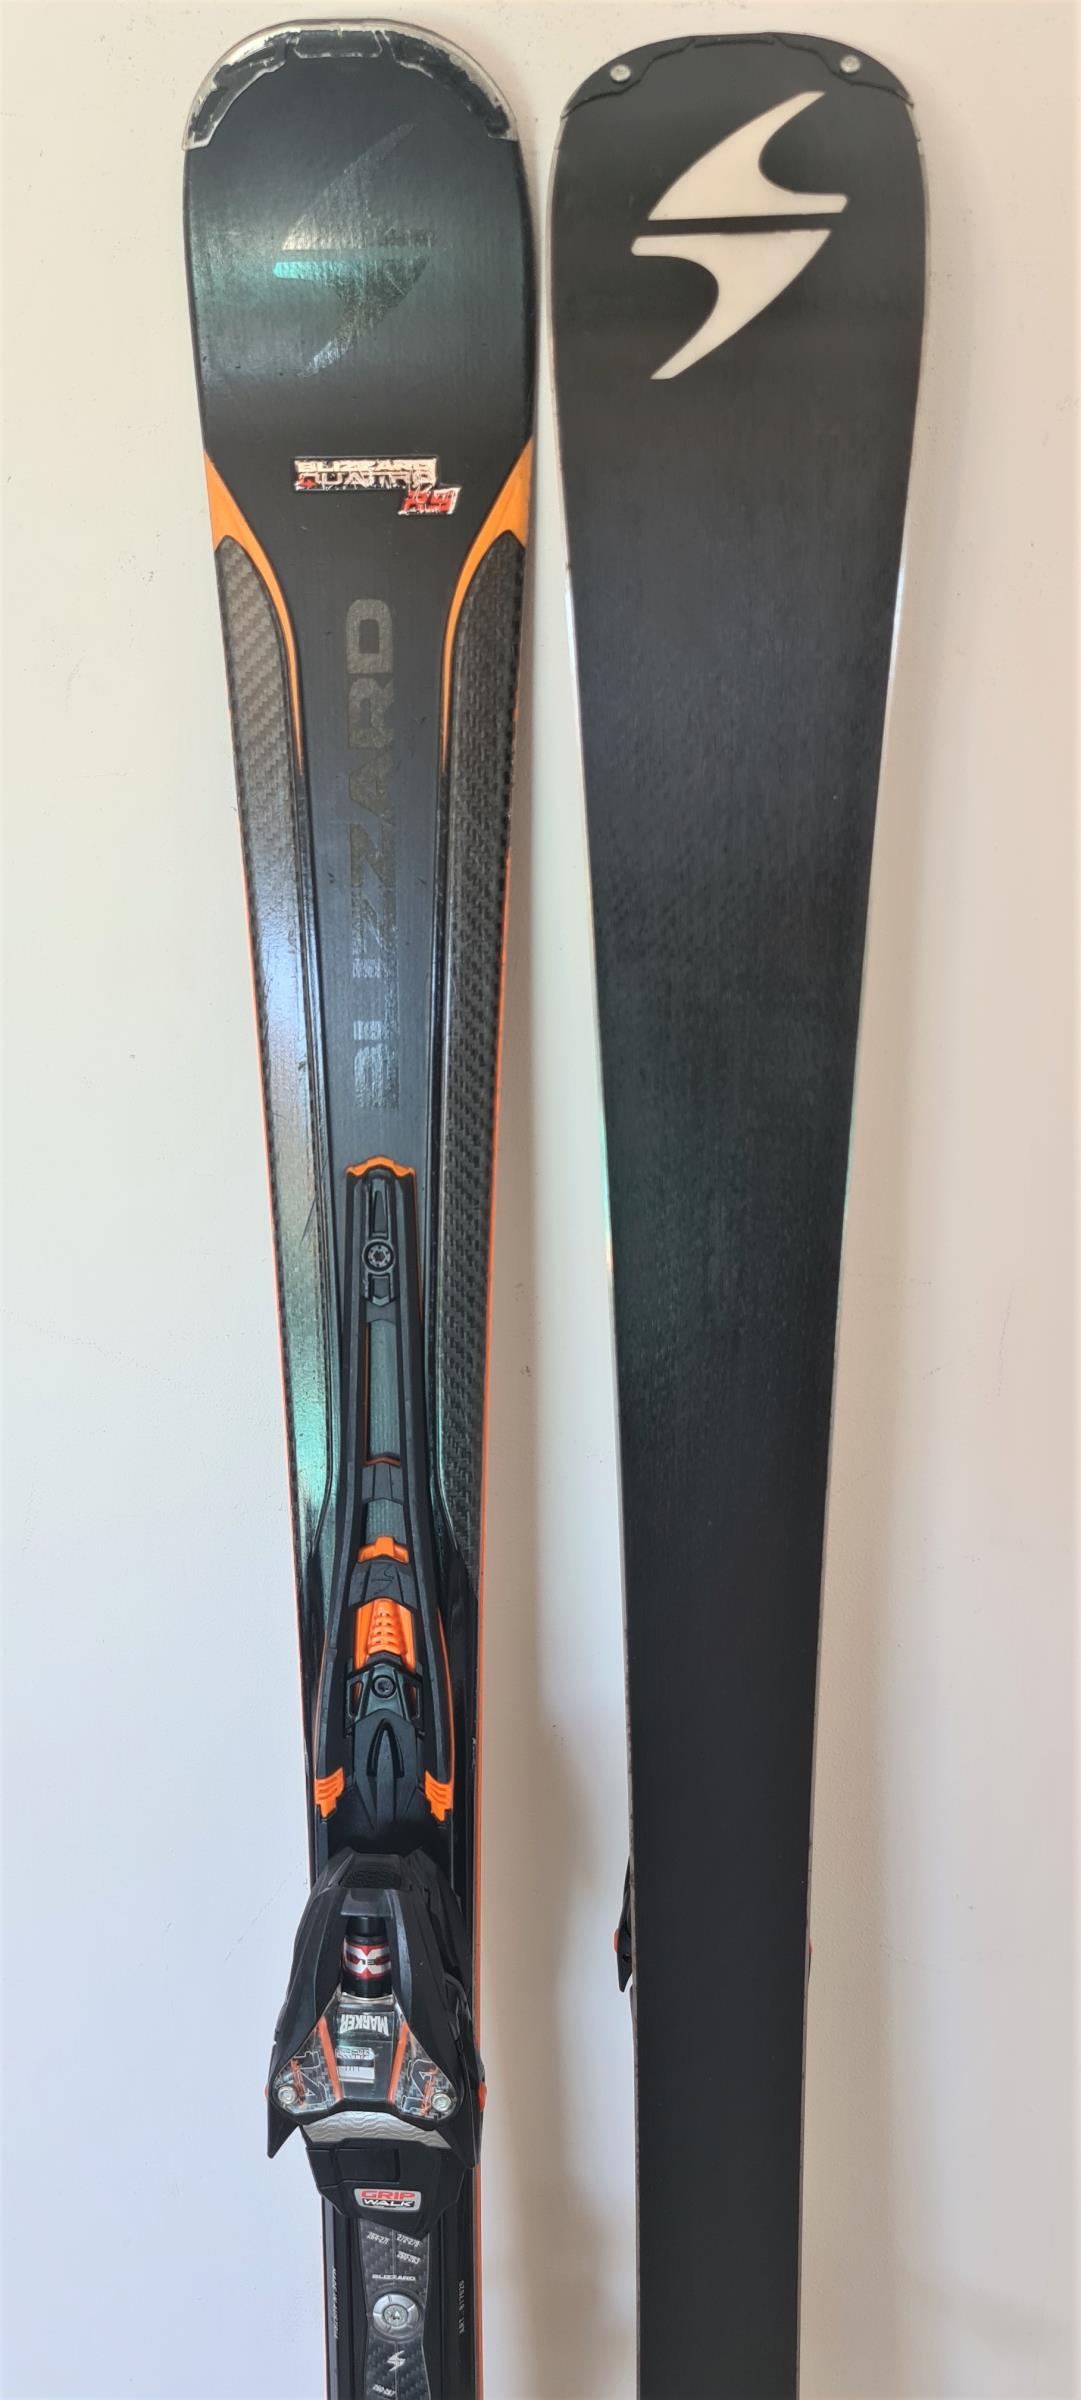 SKI D'OCCASION HOMME BLIZZARD QUATTRO RS 2018 FIXATION XCELL 14 DEMO